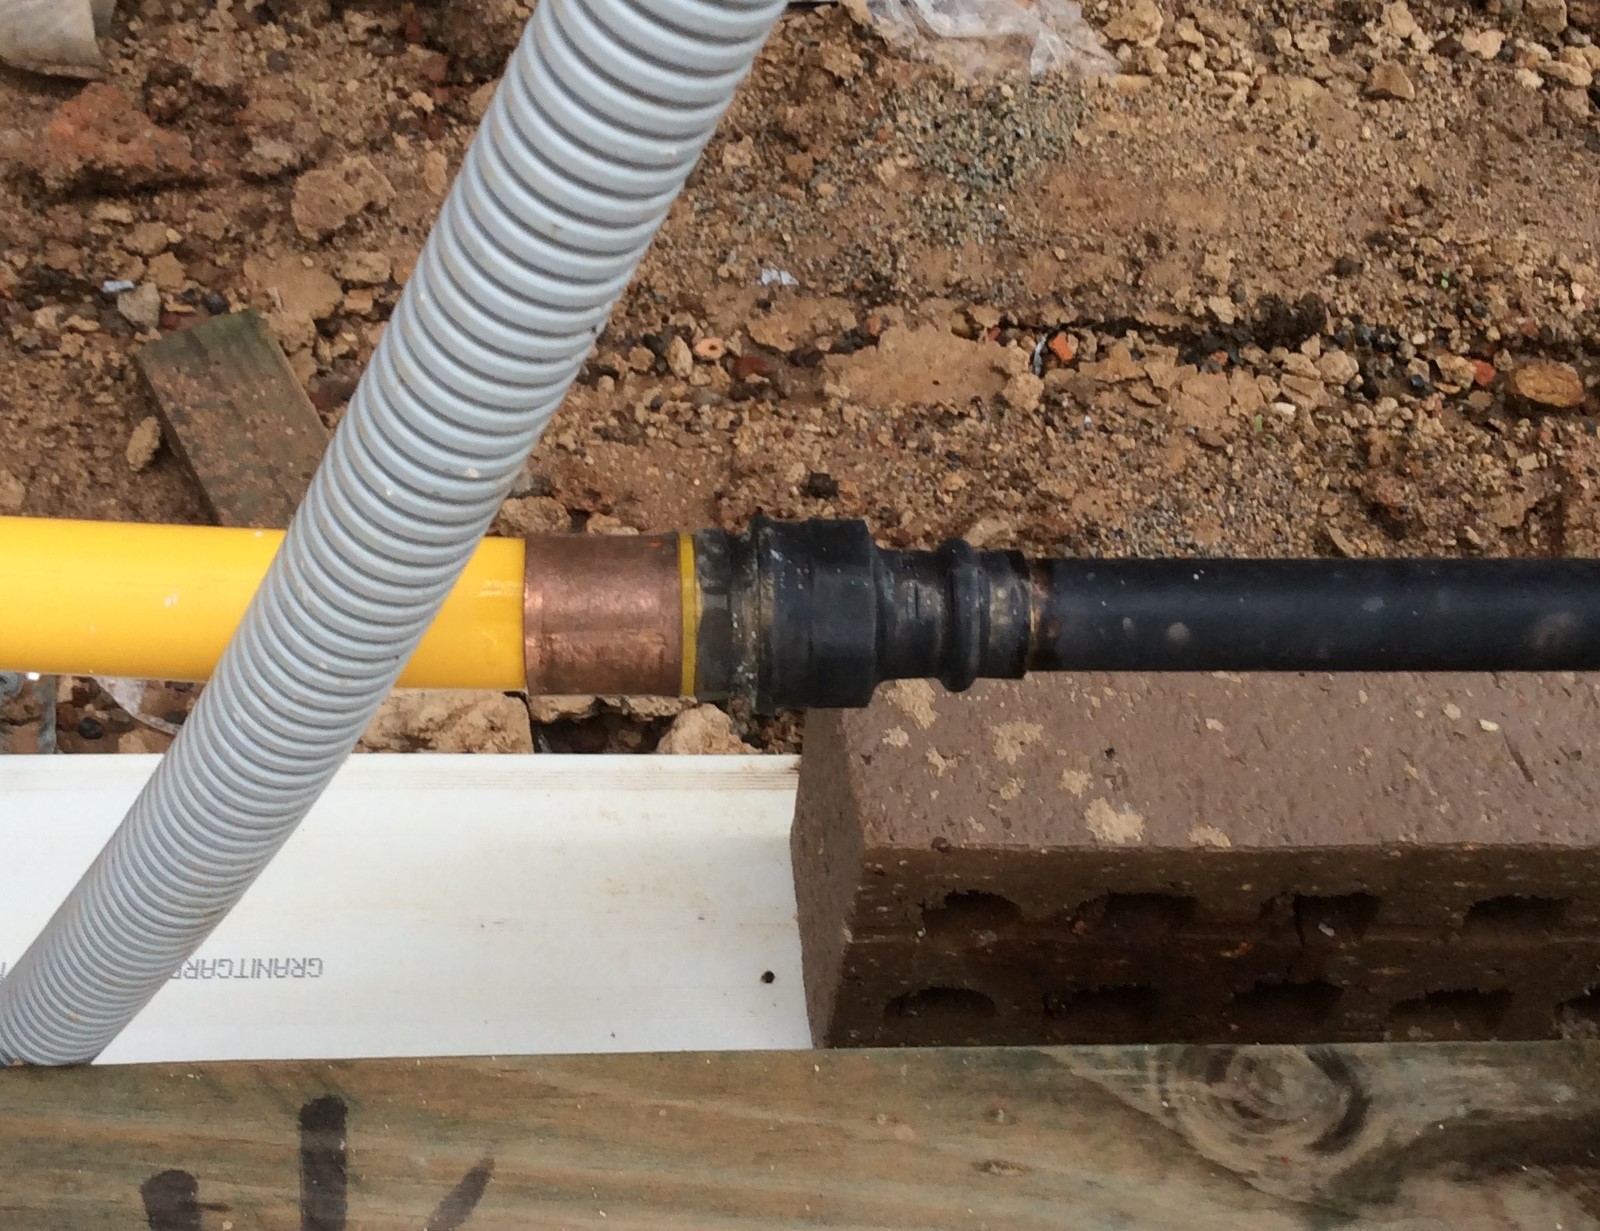 Image example 1: A threaded joiner installed to connect multilayer pipe and copper within a cavity wall, without access and/or ventilation.